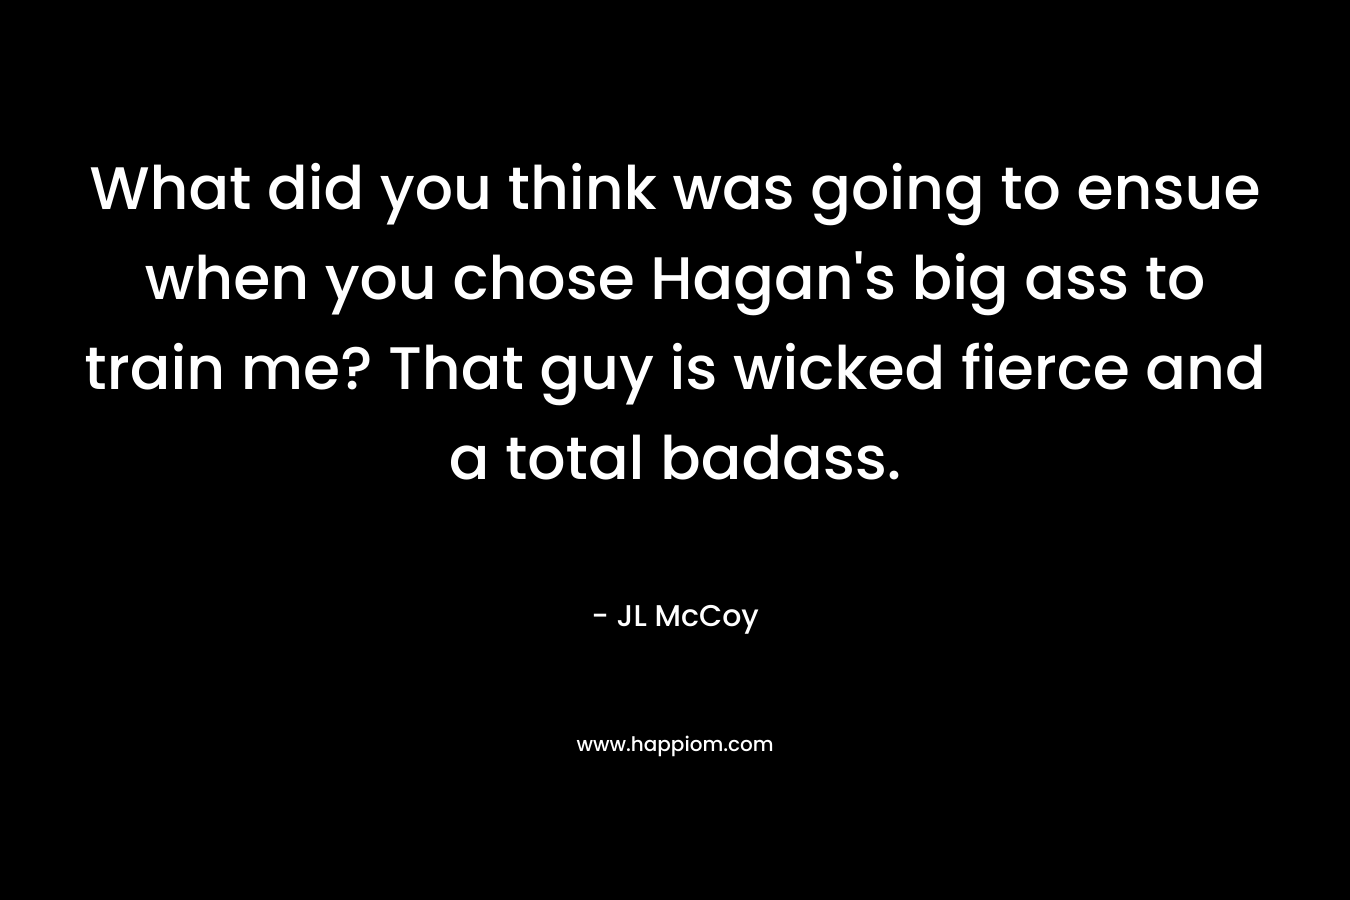 What did you think was going to ensue when you chose Hagan’s big ass to train me? That guy is wicked fierce and a total badass. – JL McCoy